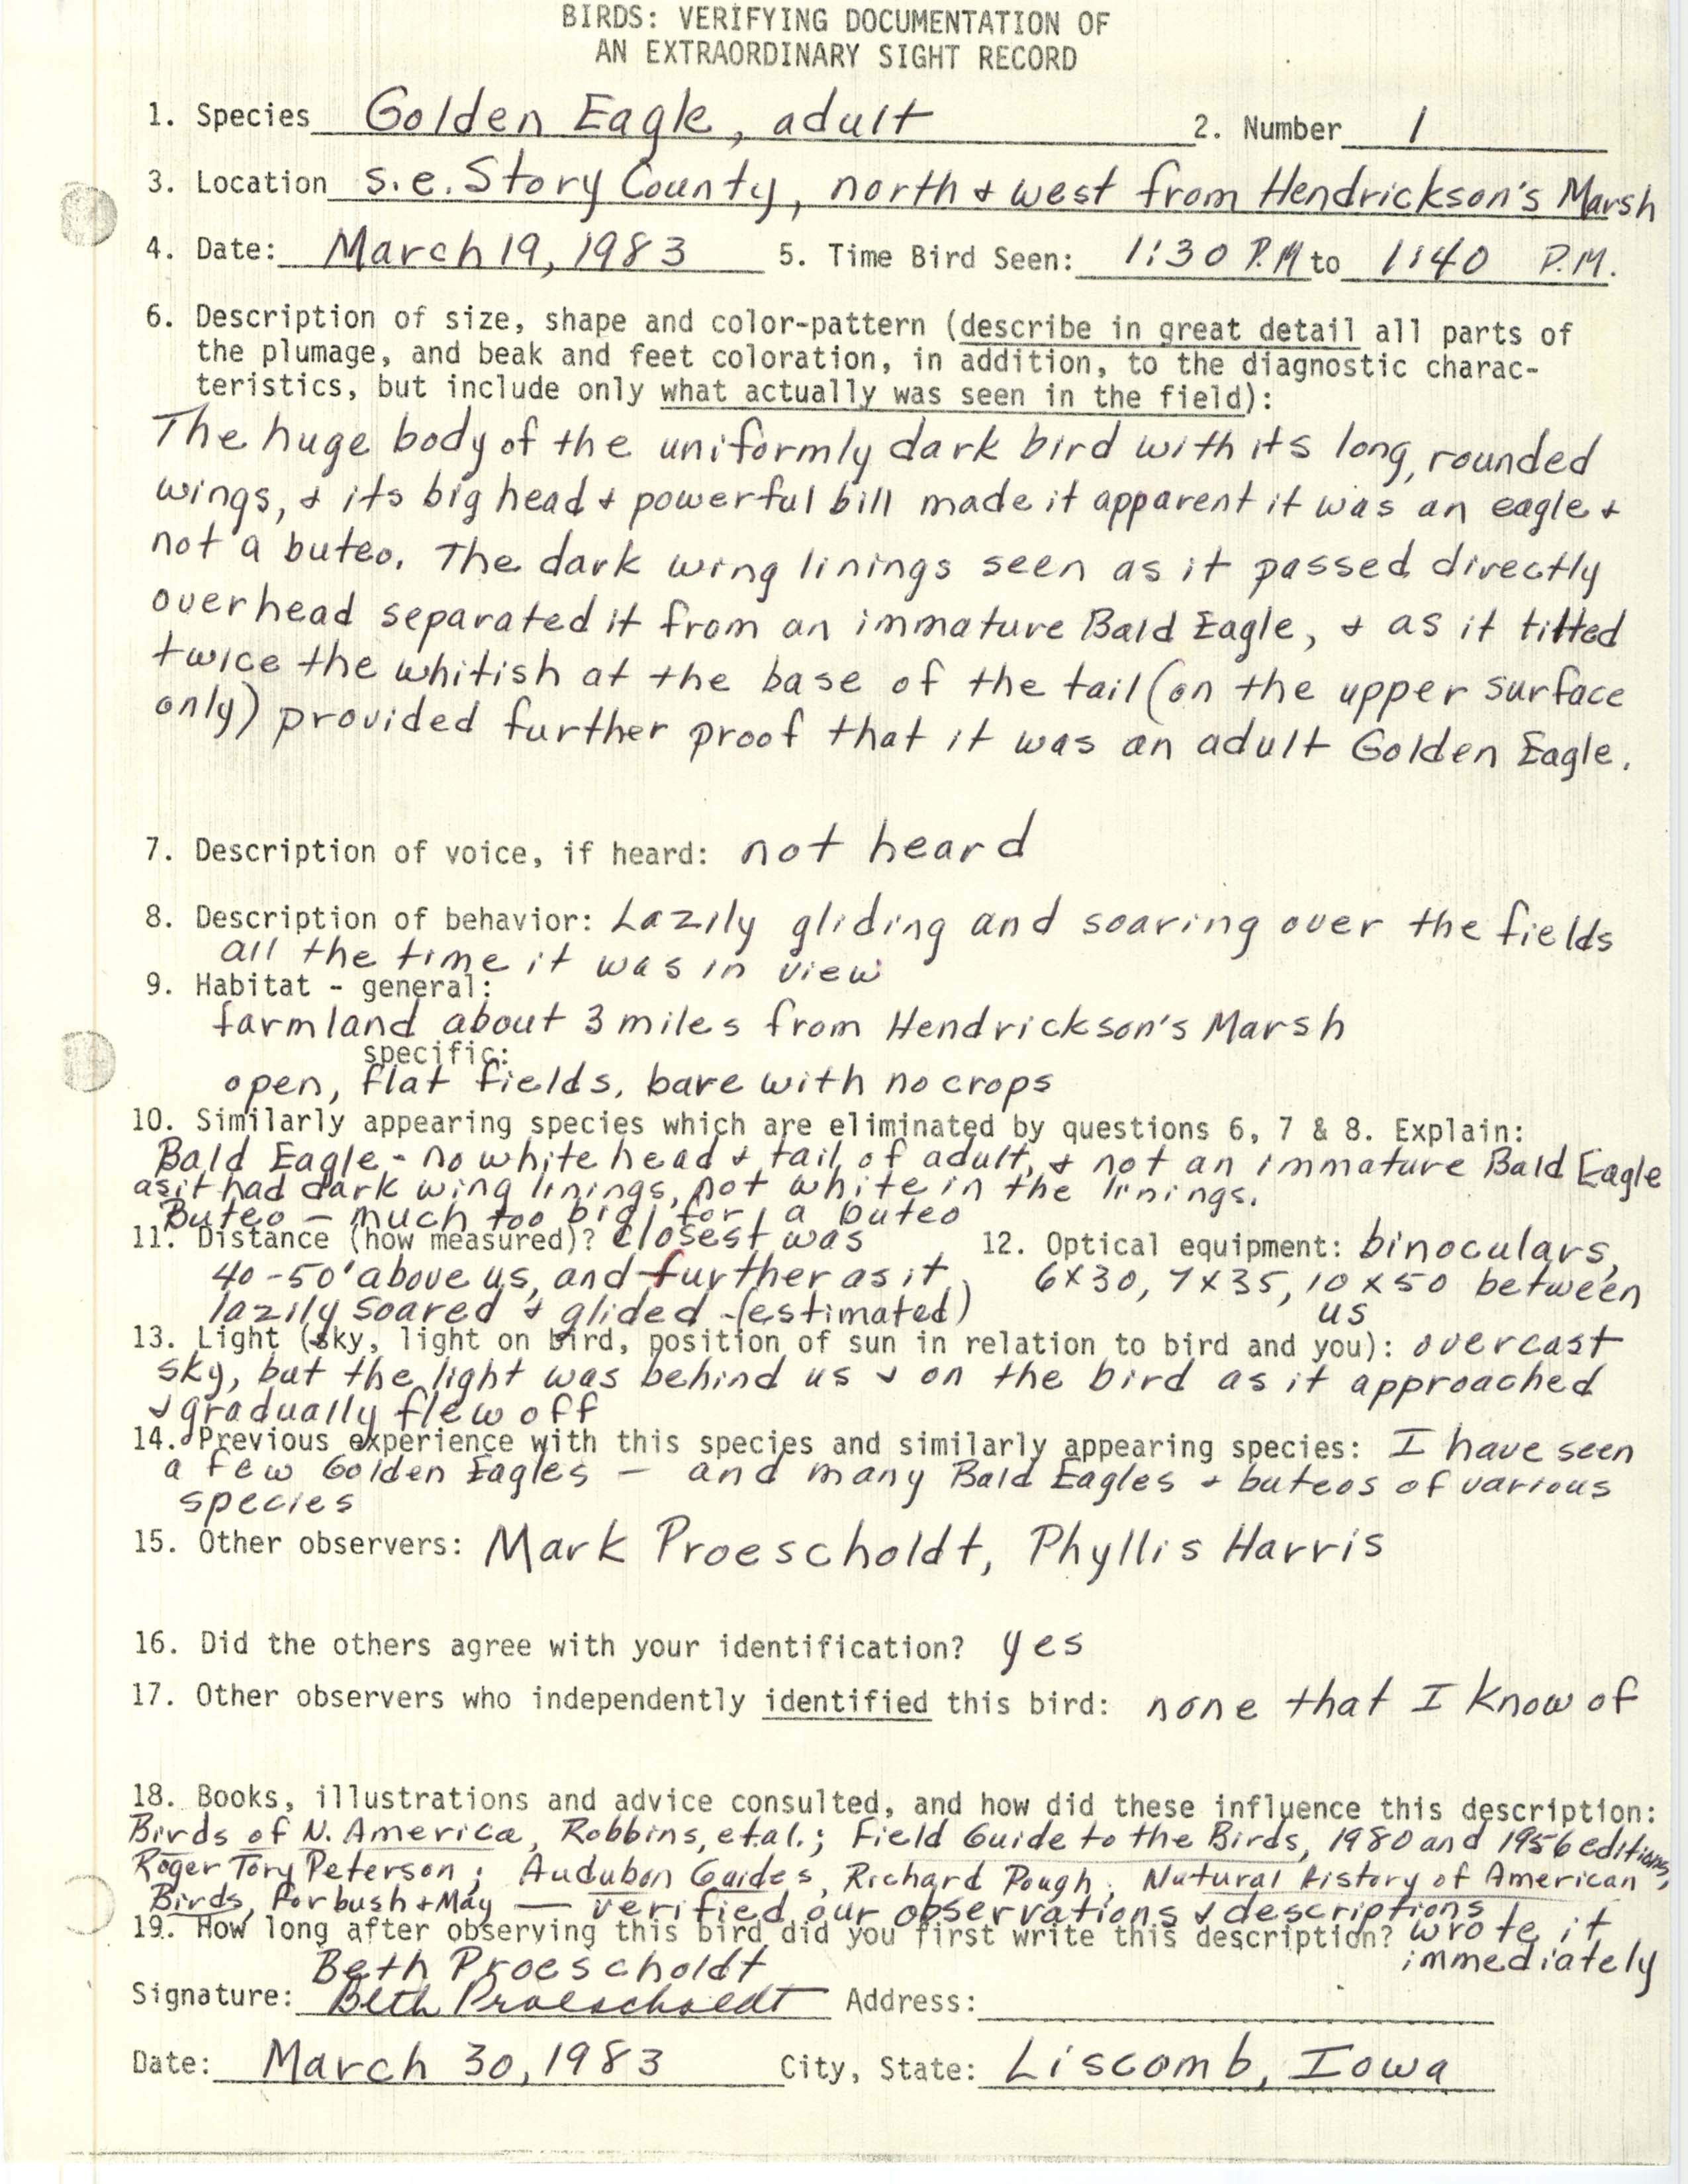 Rare bird documentation form for Golden Eagle north and west of Hendrickson's Marsh, 1983